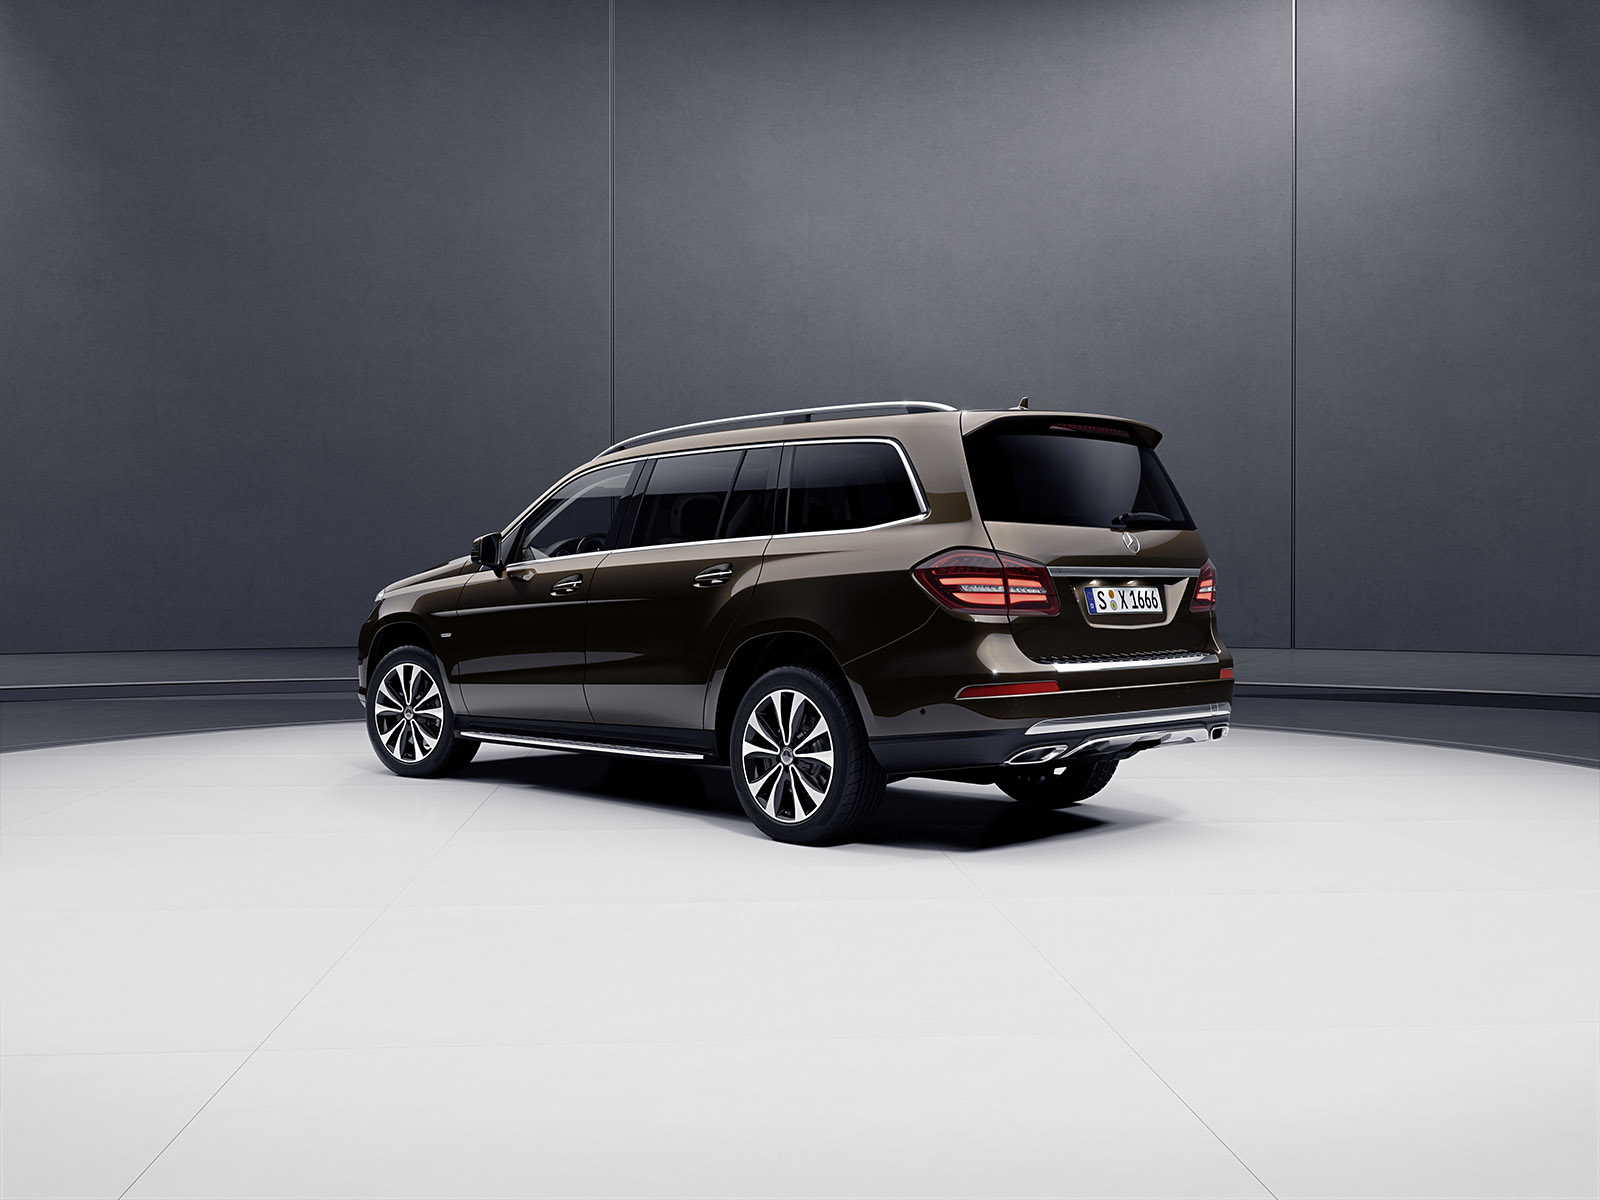 Mercedes debuts Grand Edition GLS-Class at the Detroit Auto Show